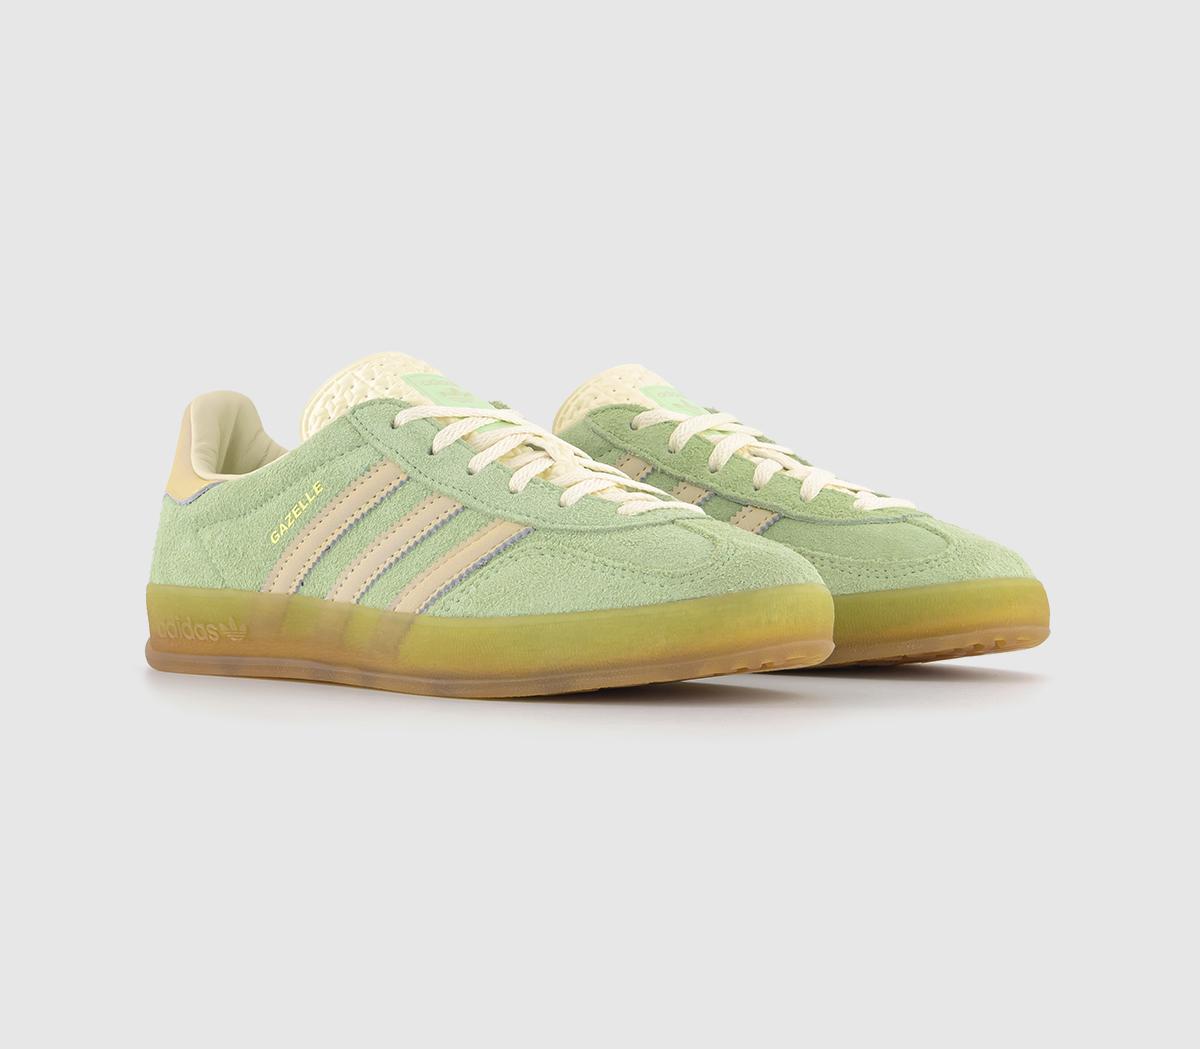 Adidas Womens Gazelle Indoor Trainers Semi Green Spark Almost Yellow Cream White, 6